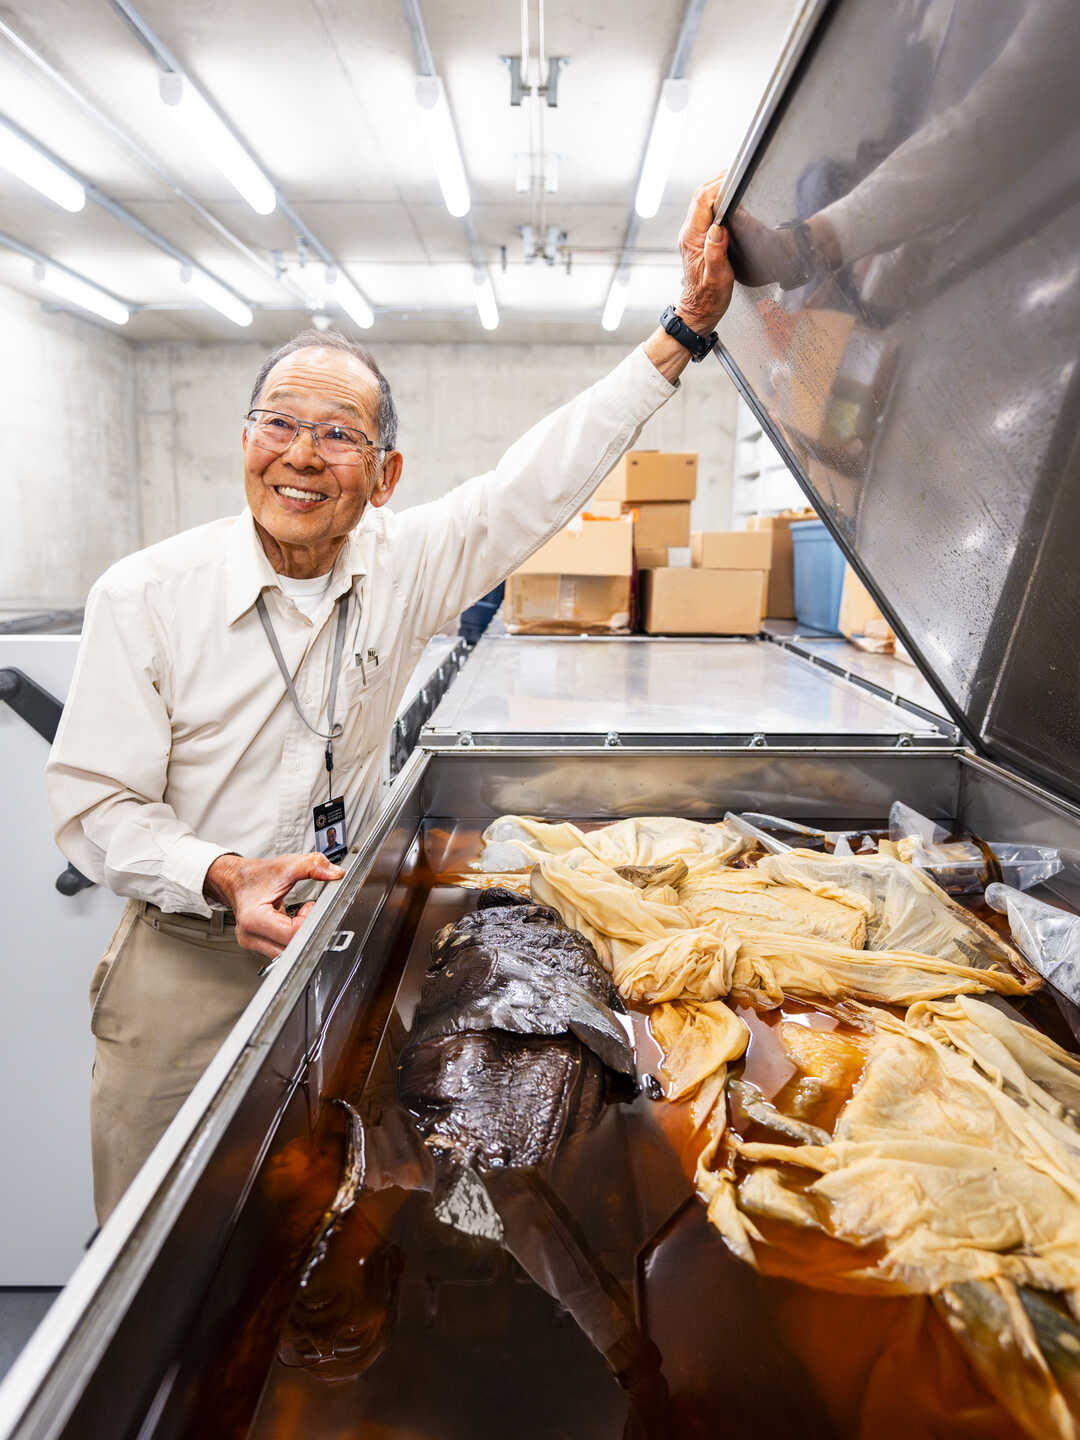 Tomio Iwamoto holding open a large container filled with fish specimens at the Academy. Photo by Gayle Laird